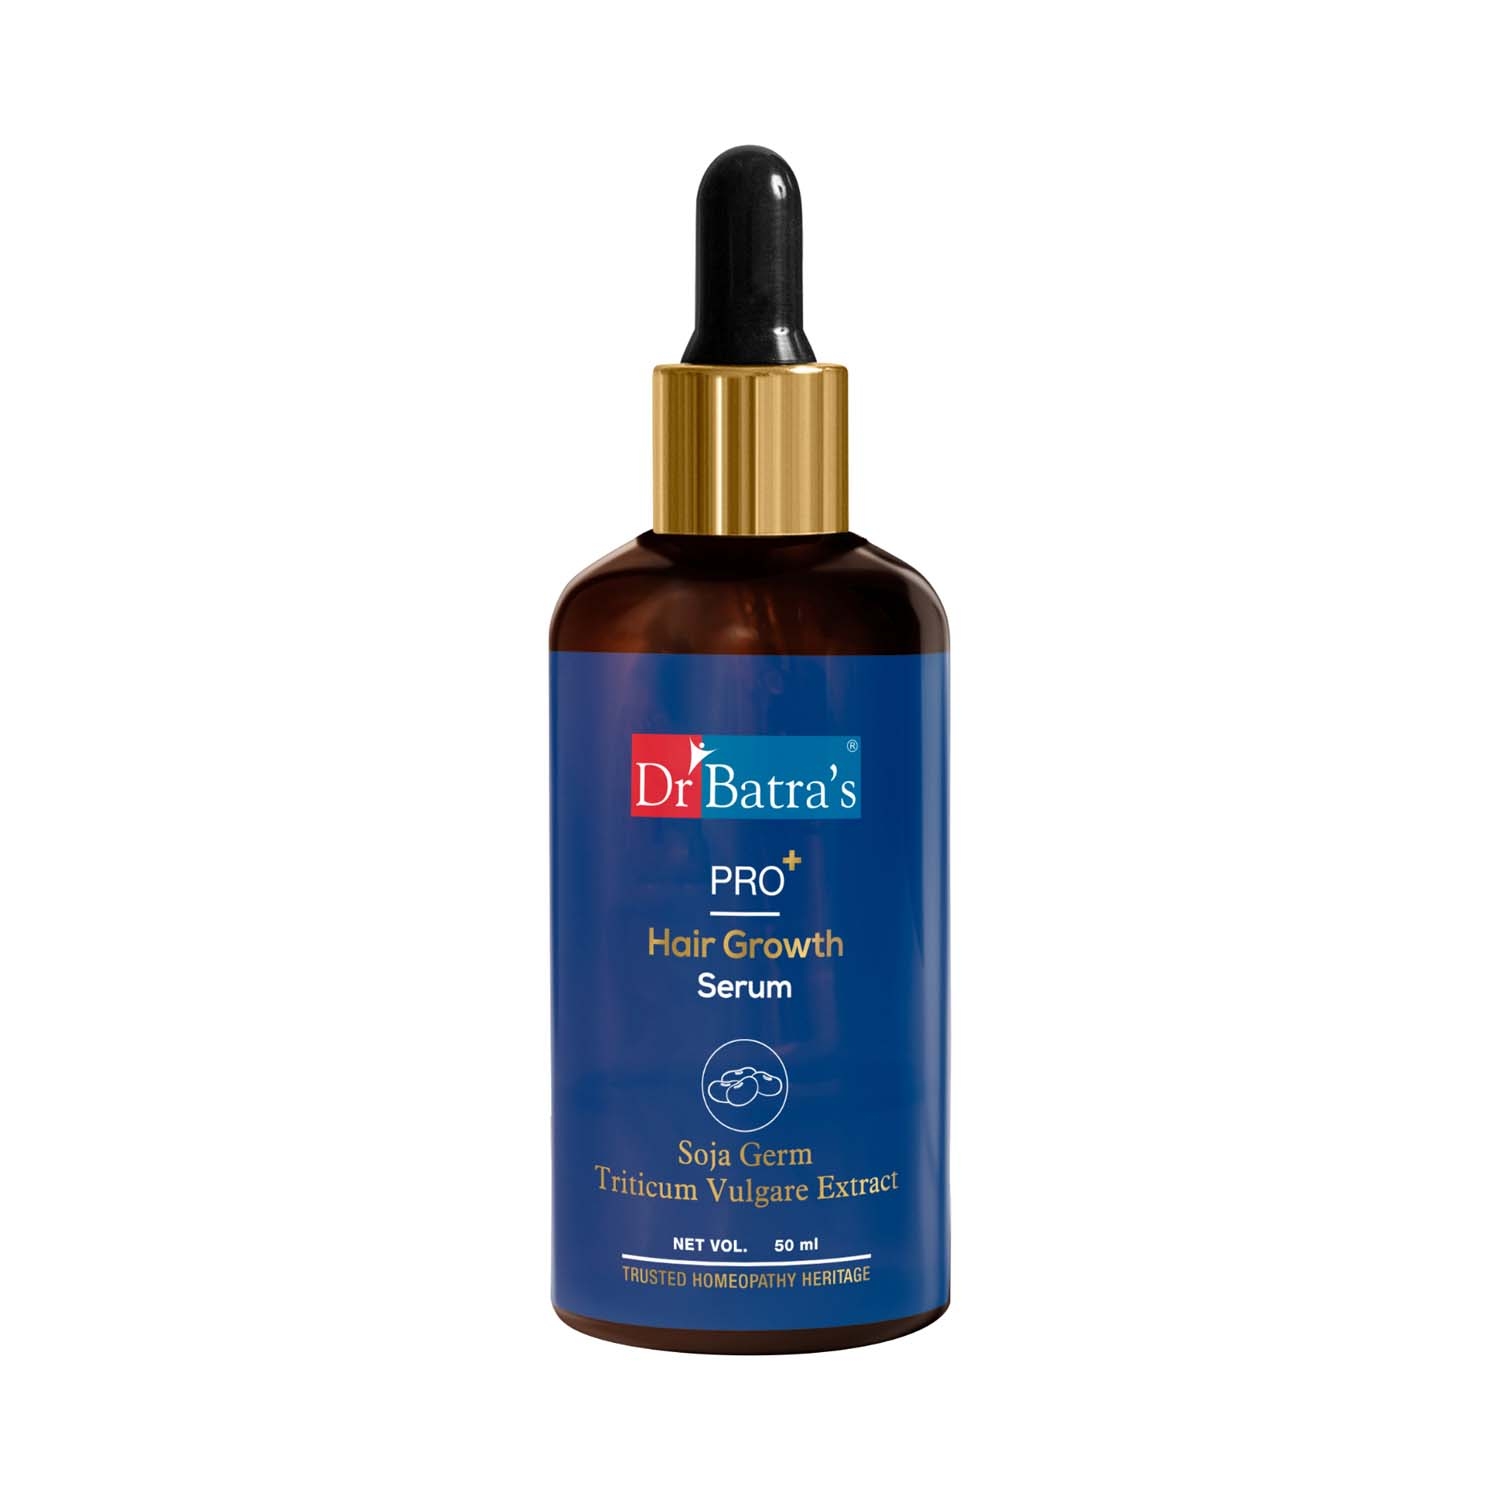 Dr Batra's | Dr Batra's Pro Hair Growth With Triticum Vulgare Extract Serum (50ml)